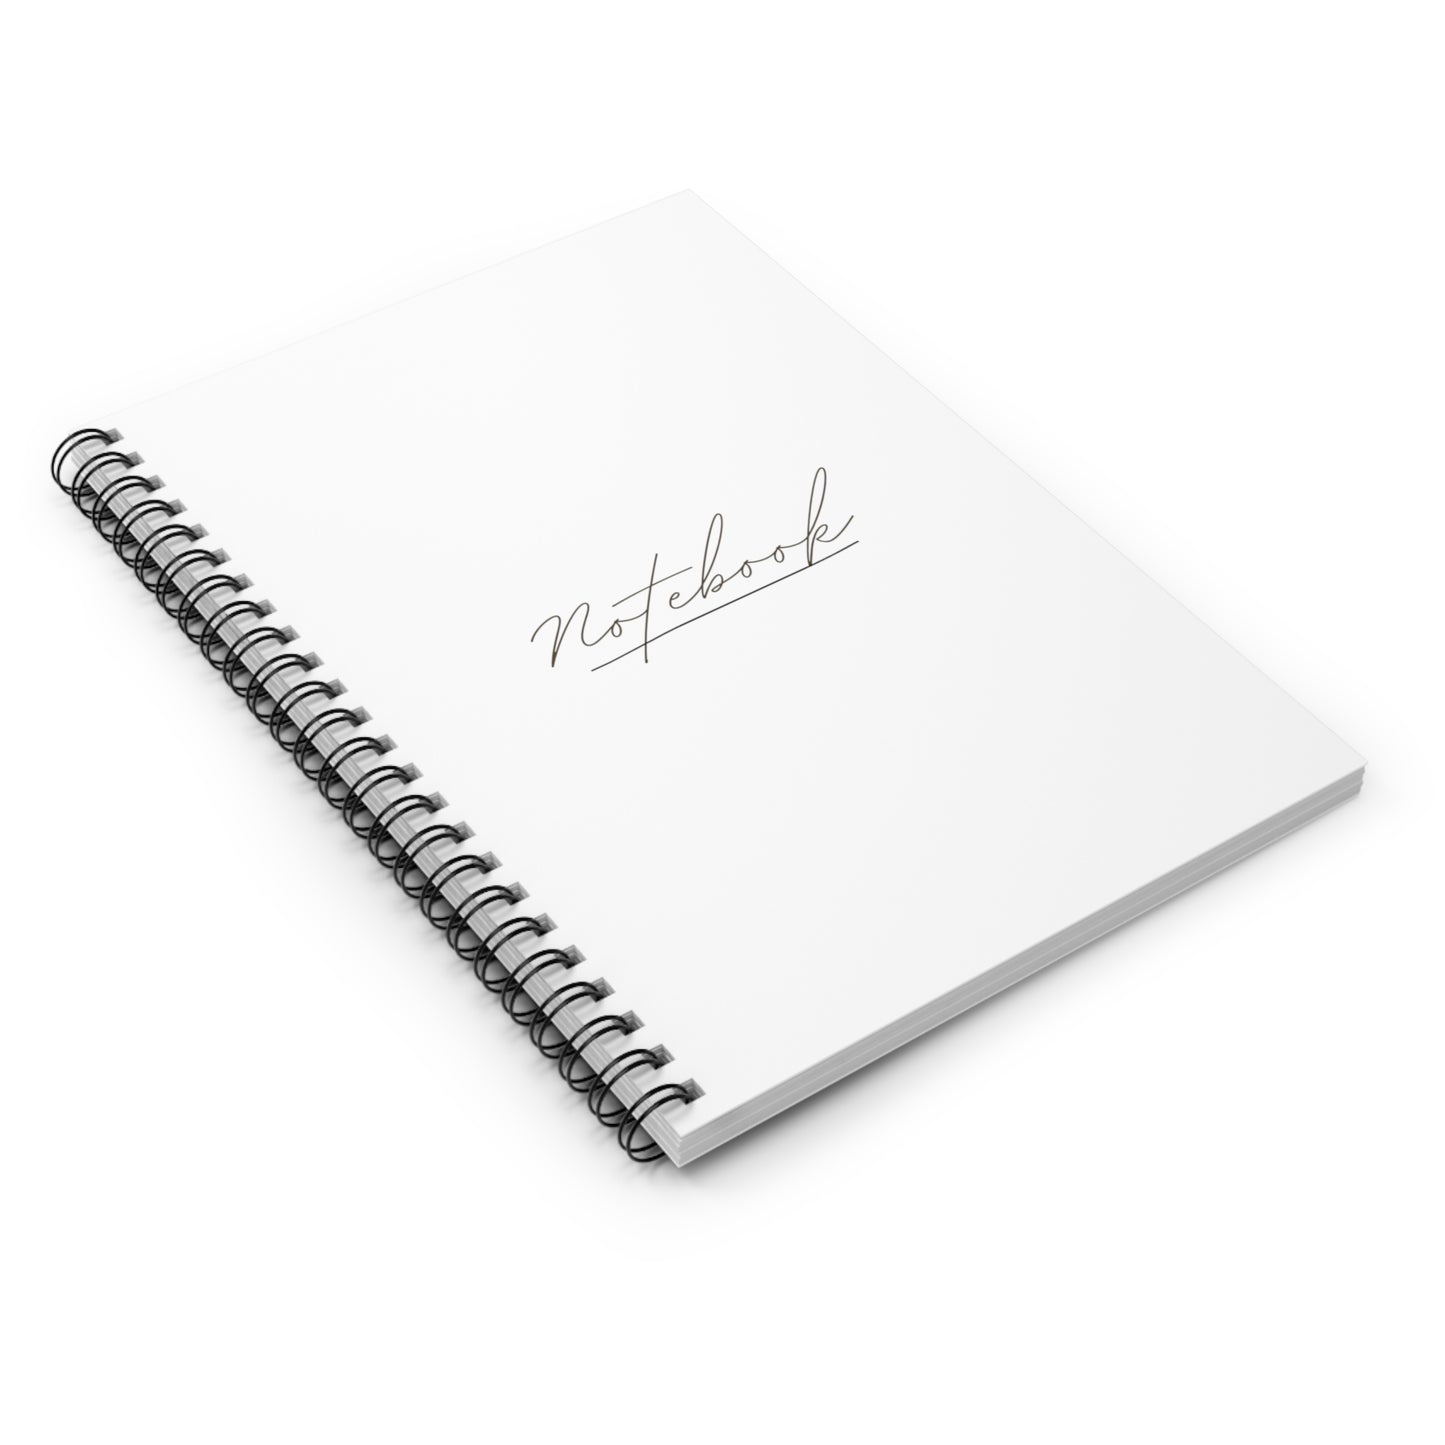 Versatile 118-Page Spiral Notebook: Durable, Stylish, and Compact